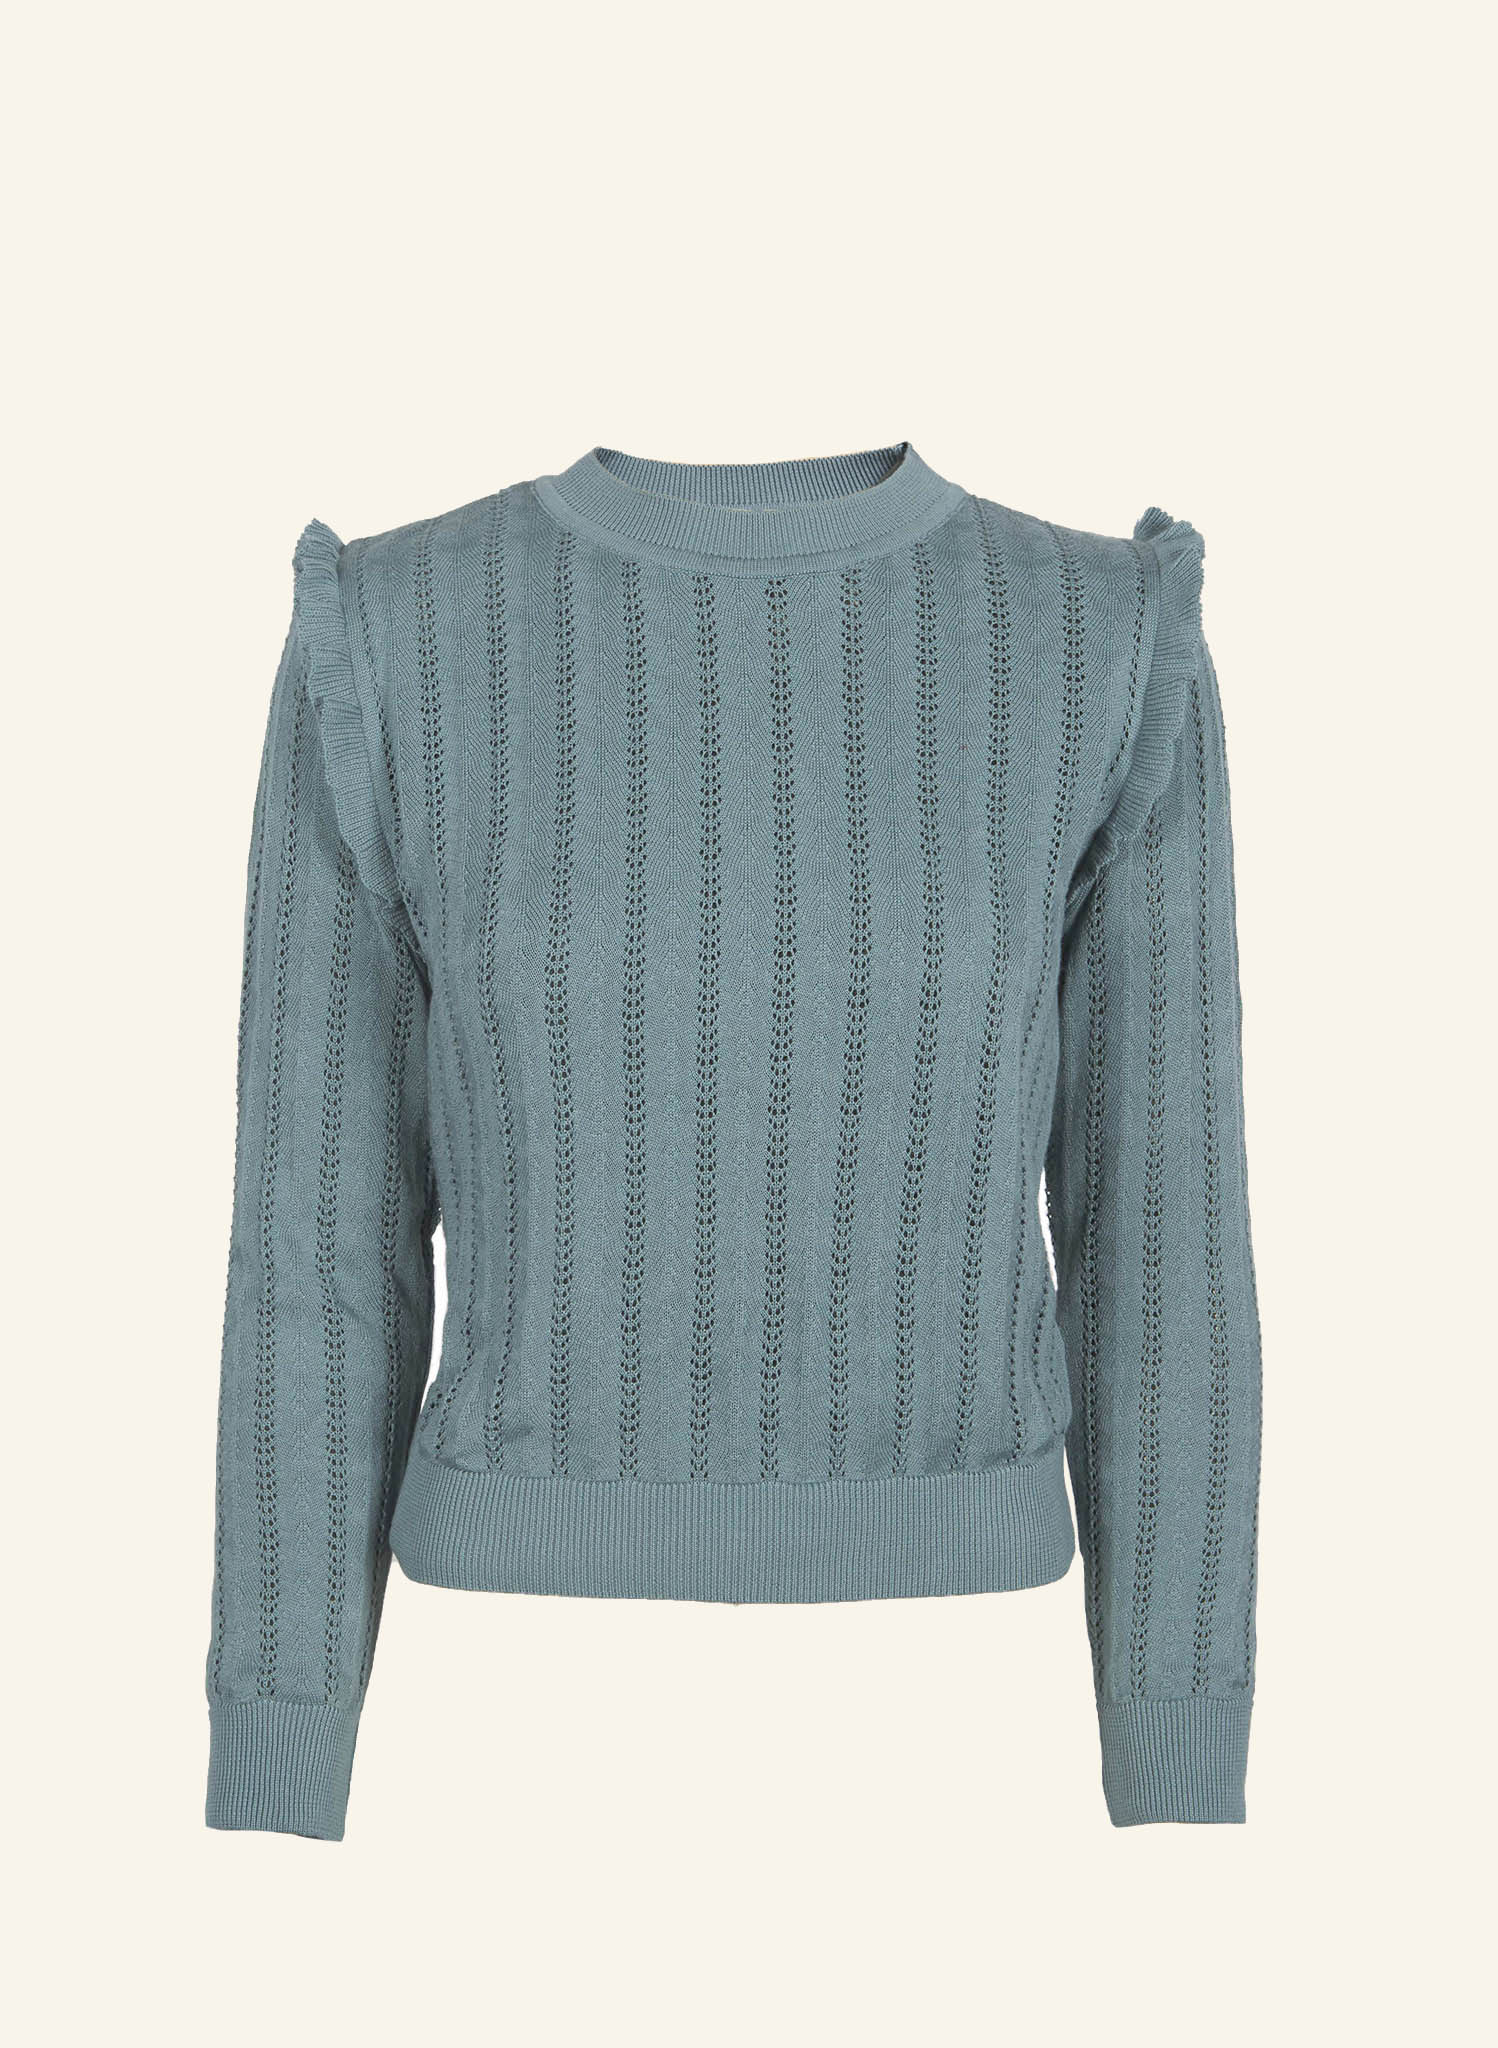 Diana - Mineral Blue Ruffle Knitted Top